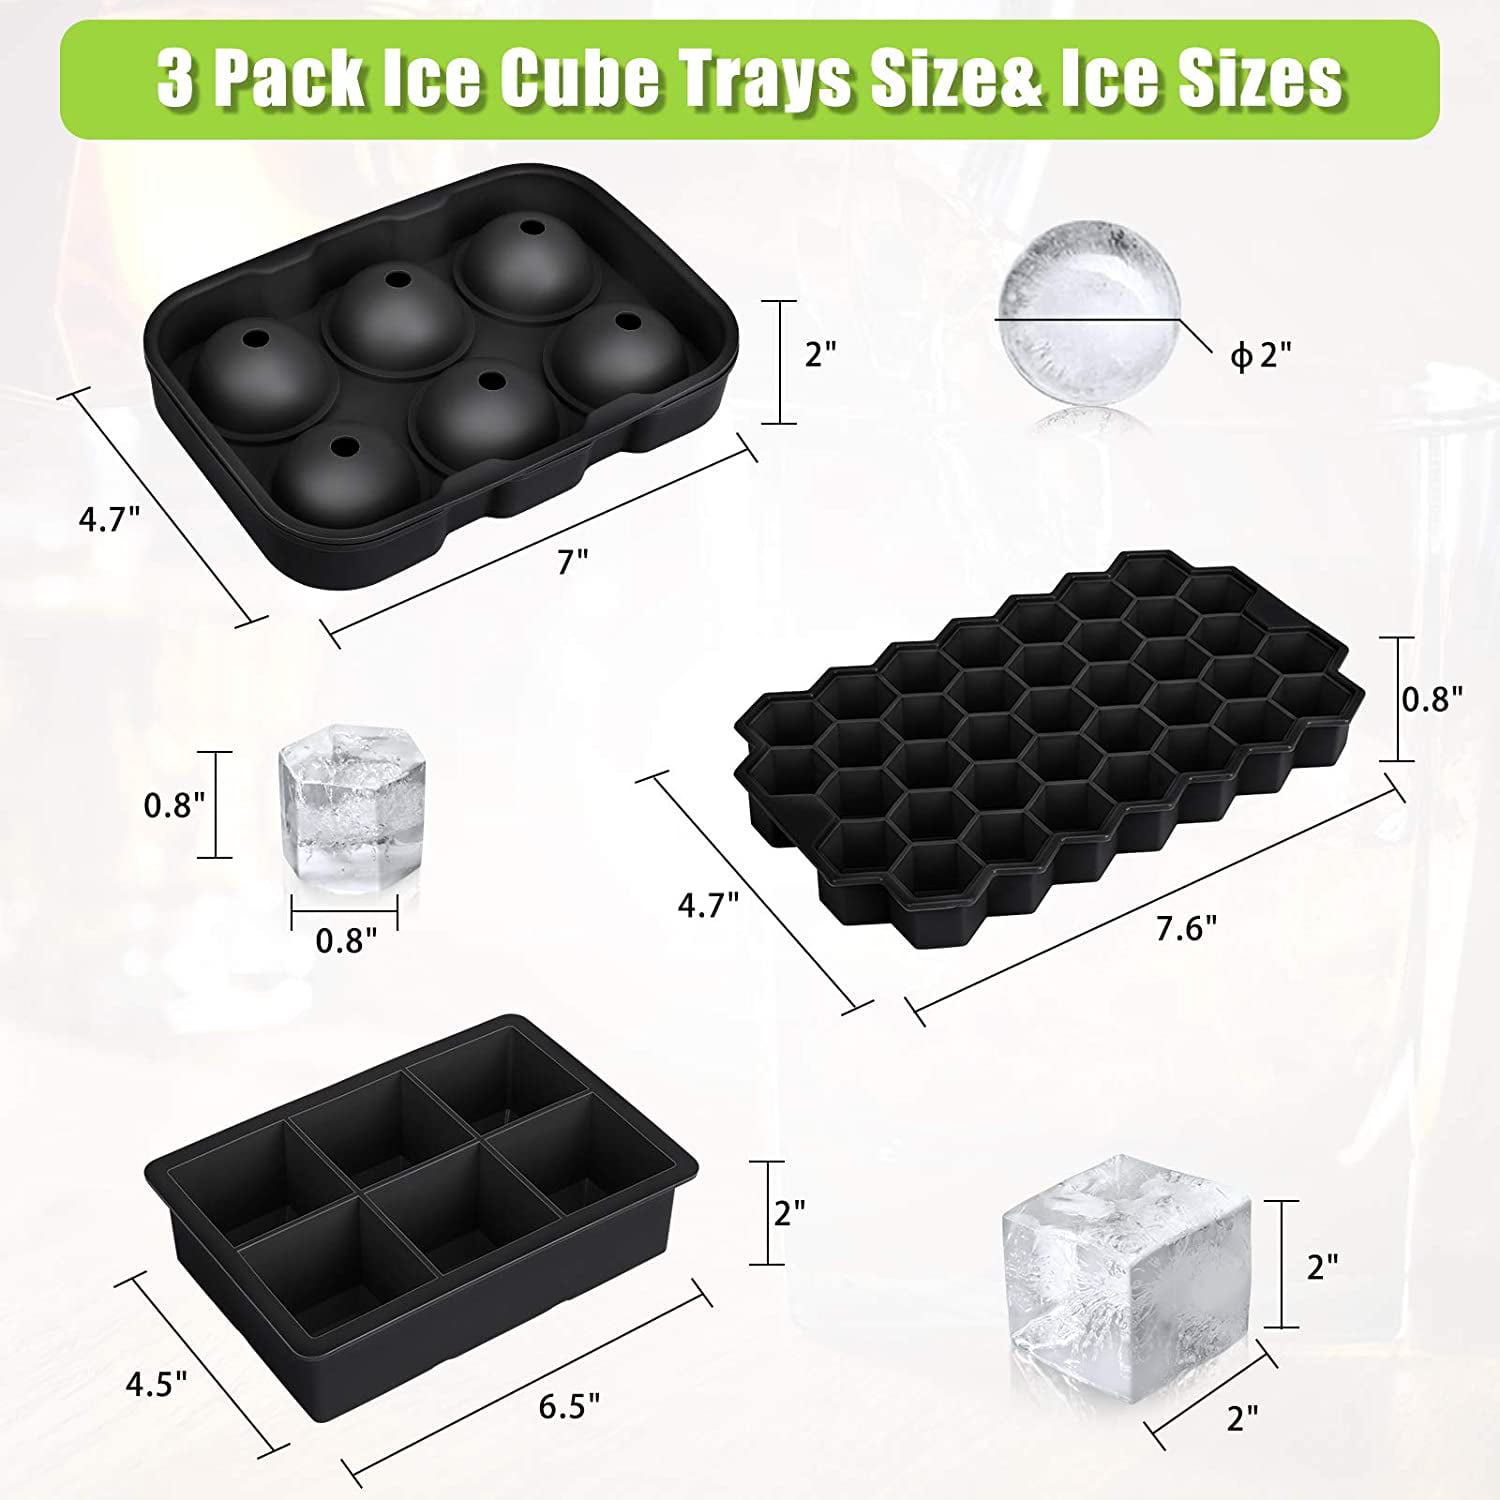 Large Ice Cube Tray for Whiskey: FDDBI Big Square Ice Cube Maker for  Cocktail - 2Pack Silicone Old Fashioned Ice Cube Trays - 2inch Huge Cubed  Ice